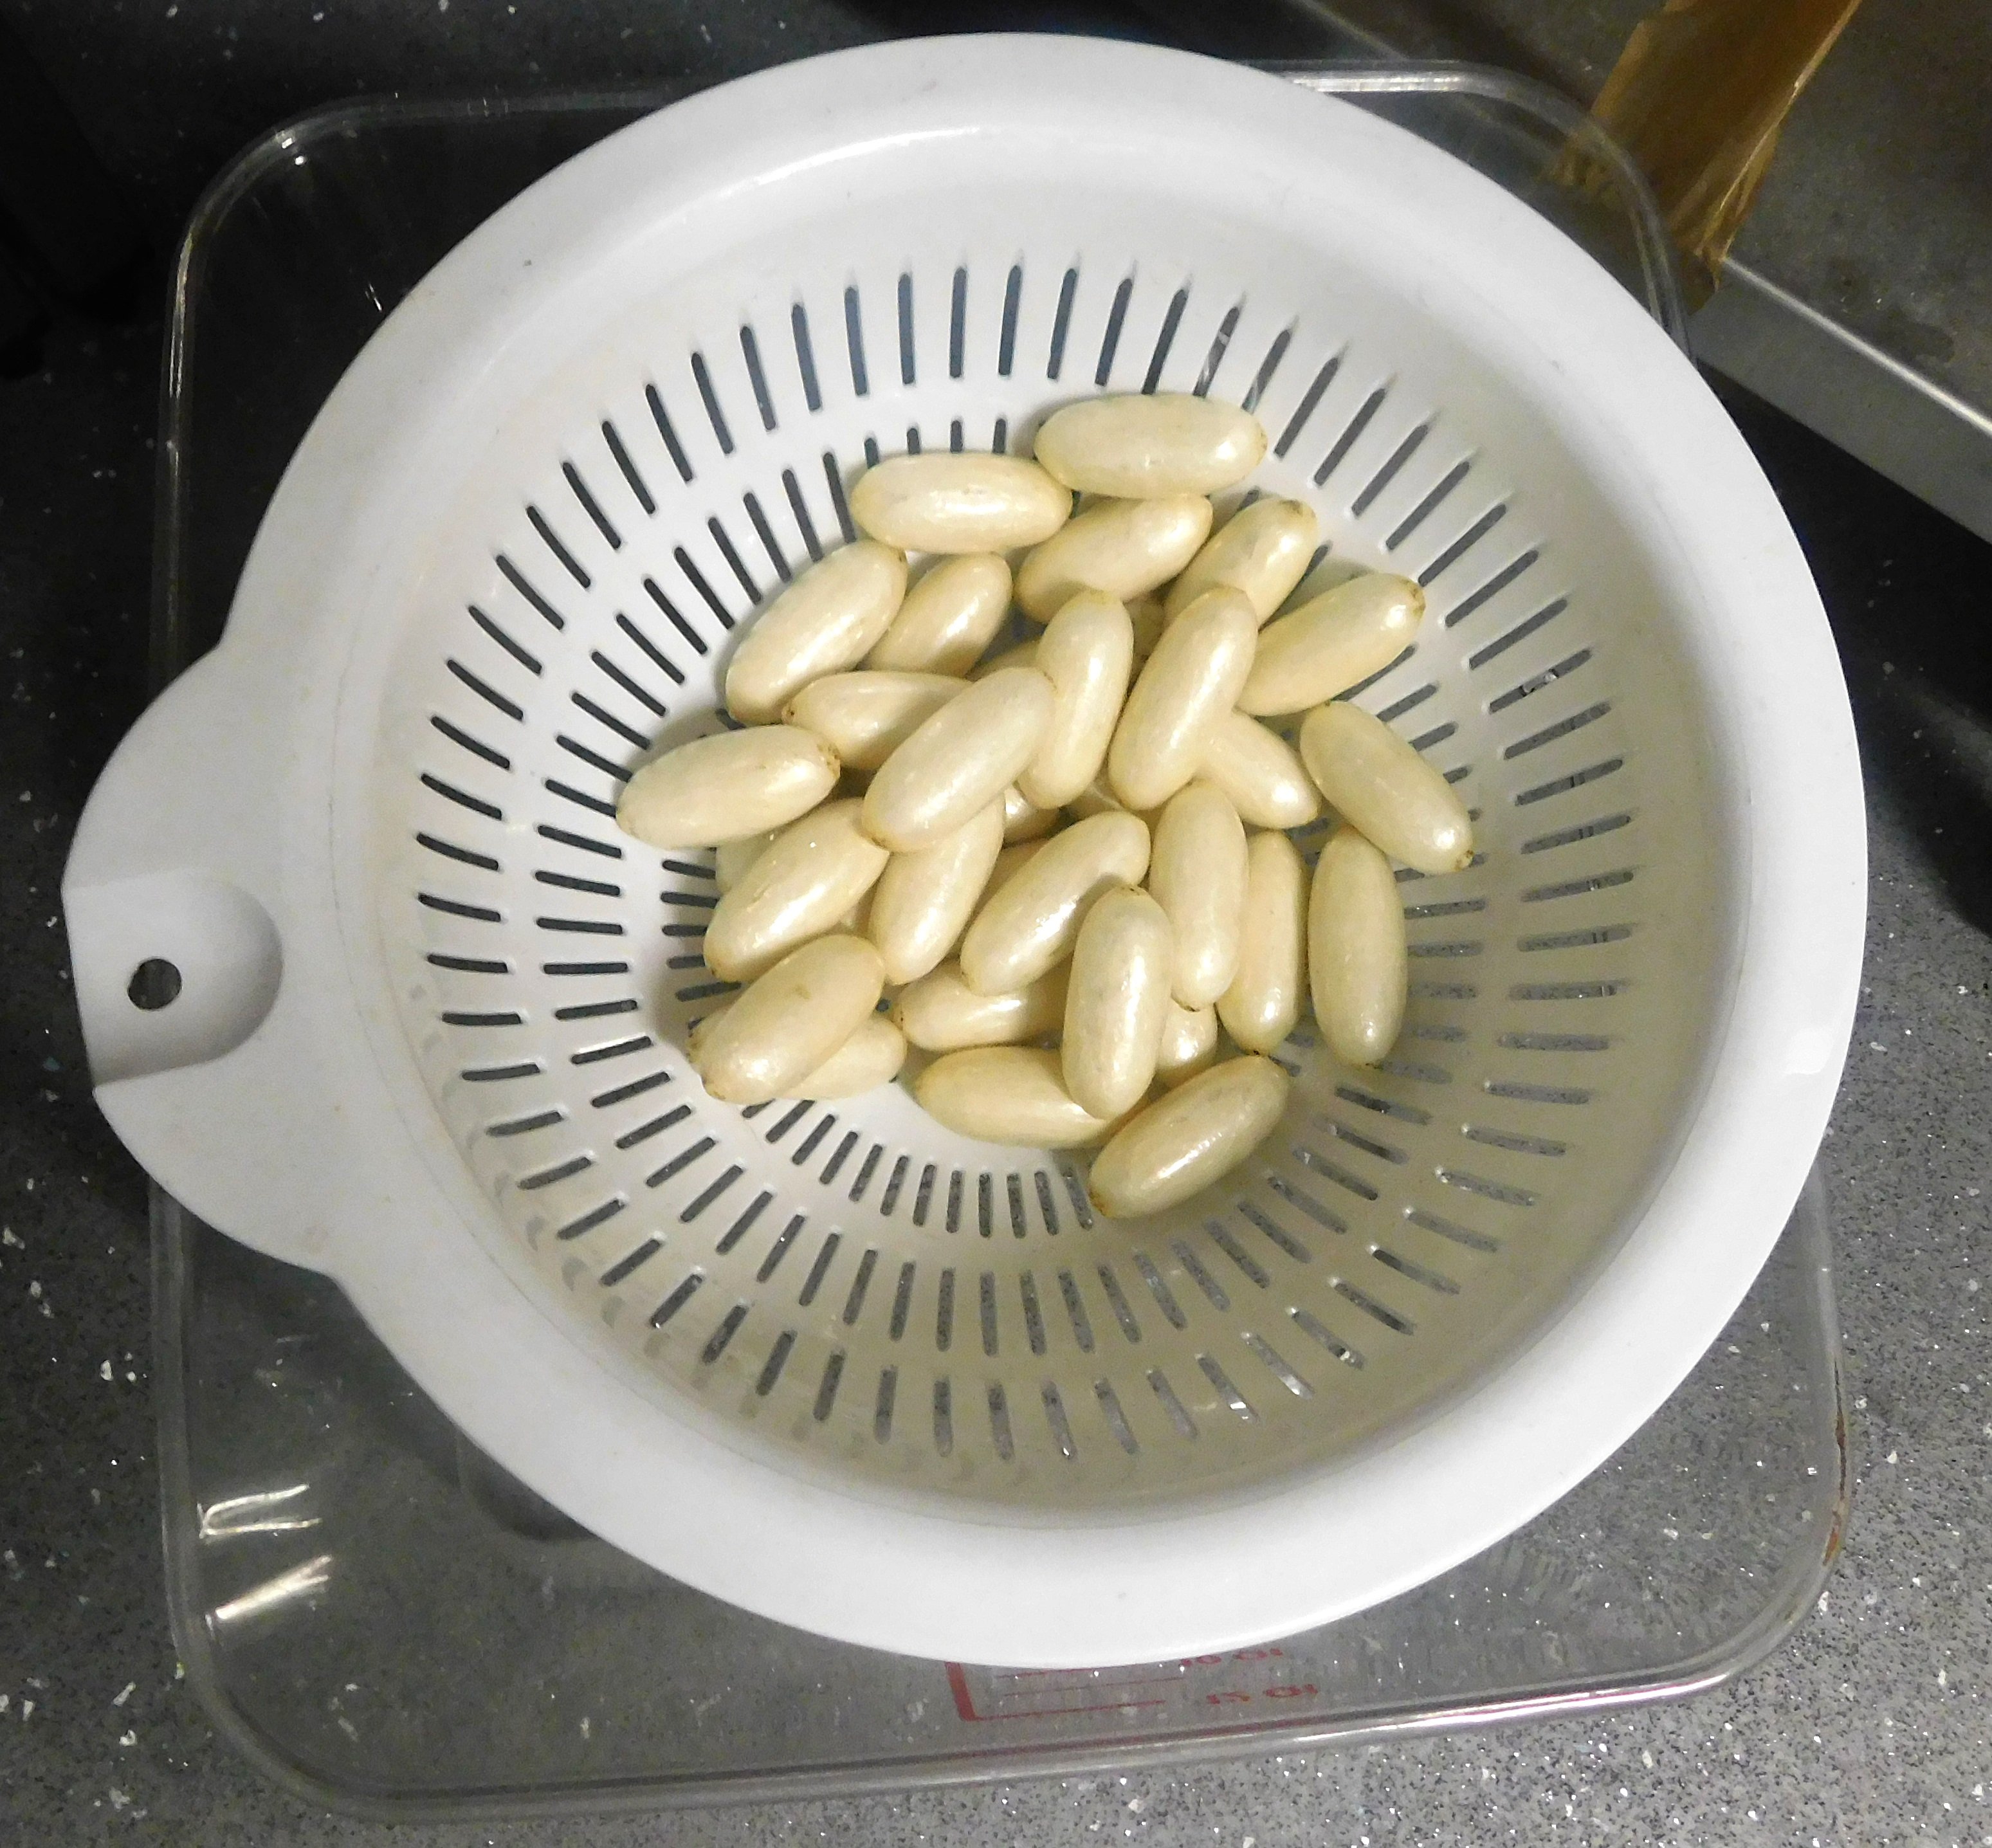 Pellets of cocaine recovered from an internal courier